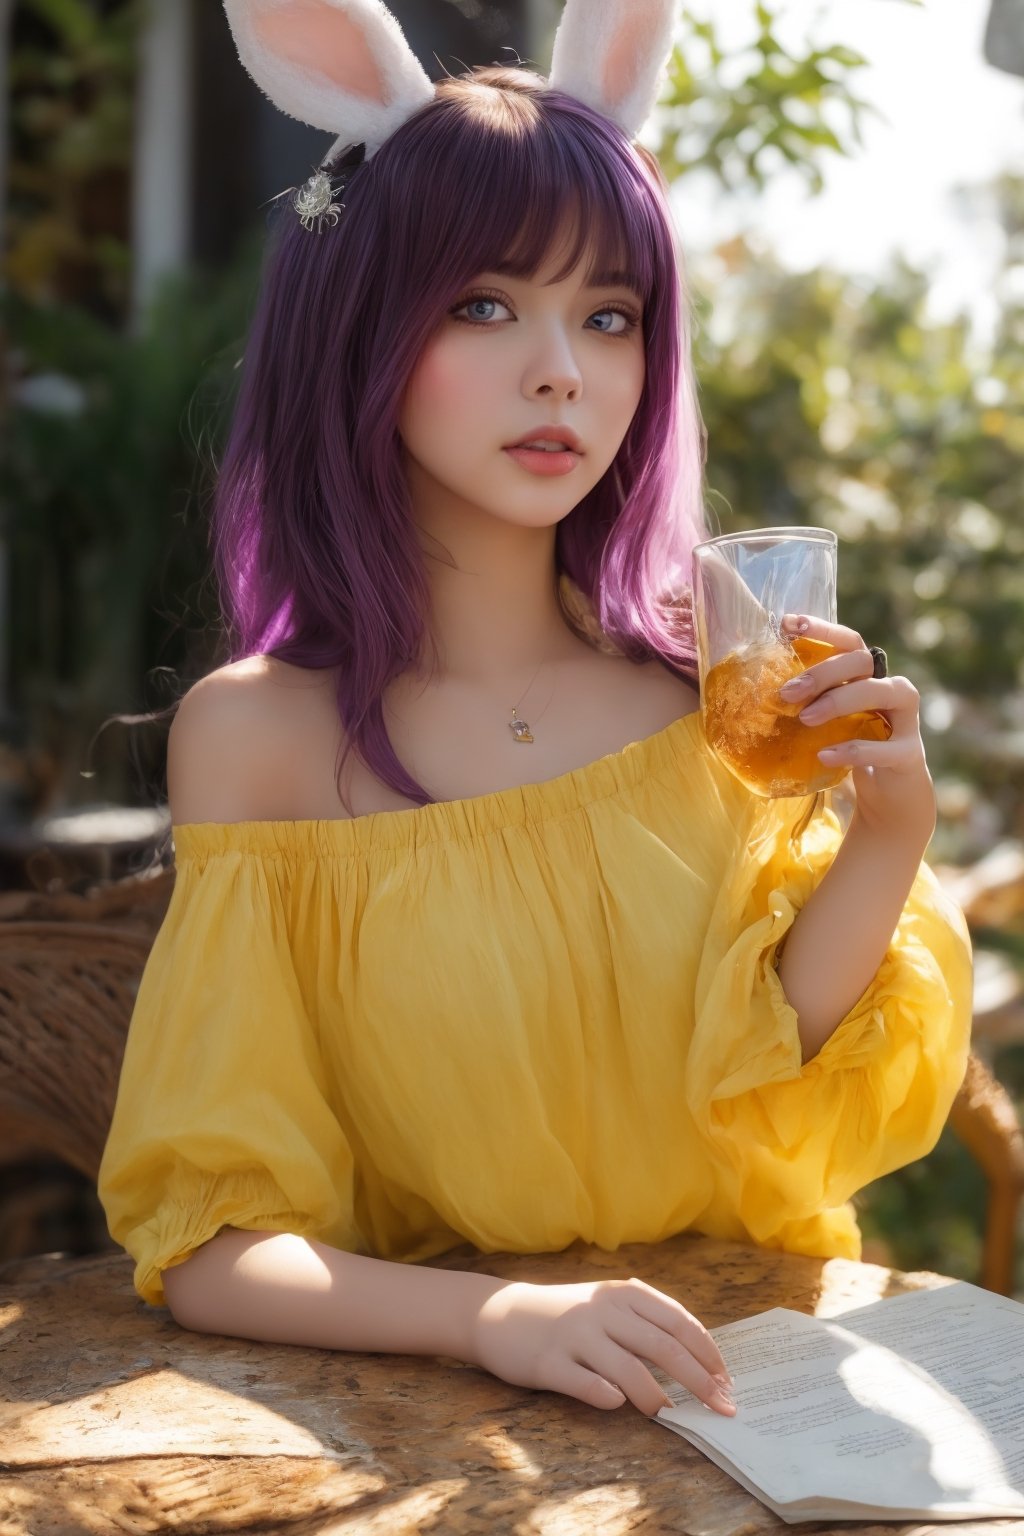 Generate hyper realistic image of a playful woman with bunny ears and an hourglass body, sitting at a table outdoors. Her long, purple hair is adorned with fake animal ears, and her parted bangs frame her face delicately. Dressed in a yellow off-shoulder shirt and a black miniskirt, she holds a cup with a drinking straw, her earrings glinting in the daylight.,idol